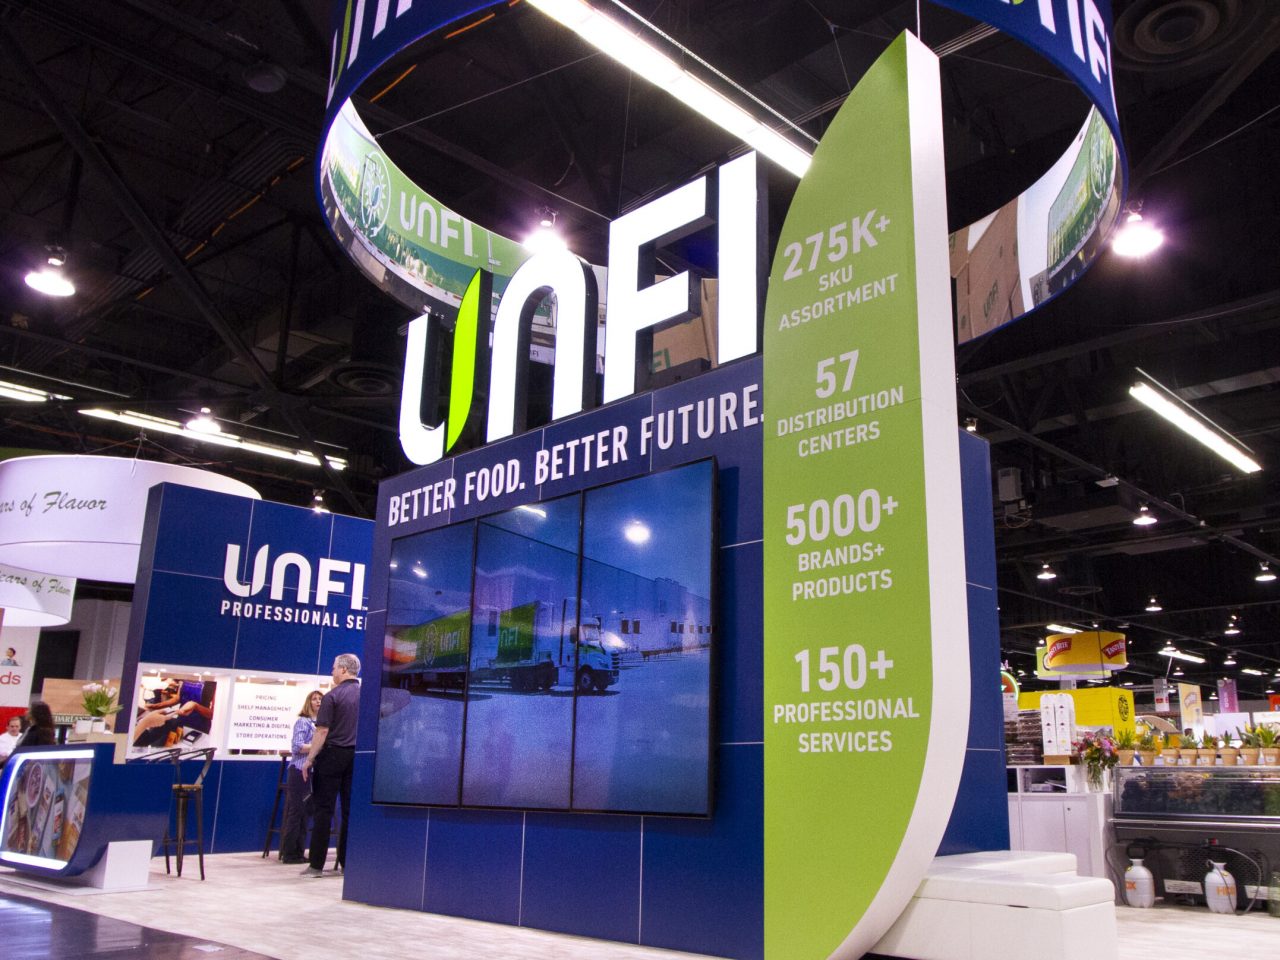 Wide-Angle View of the Video Monitor Area at the UNFI Exhibit at the Natural Products Expo West Show